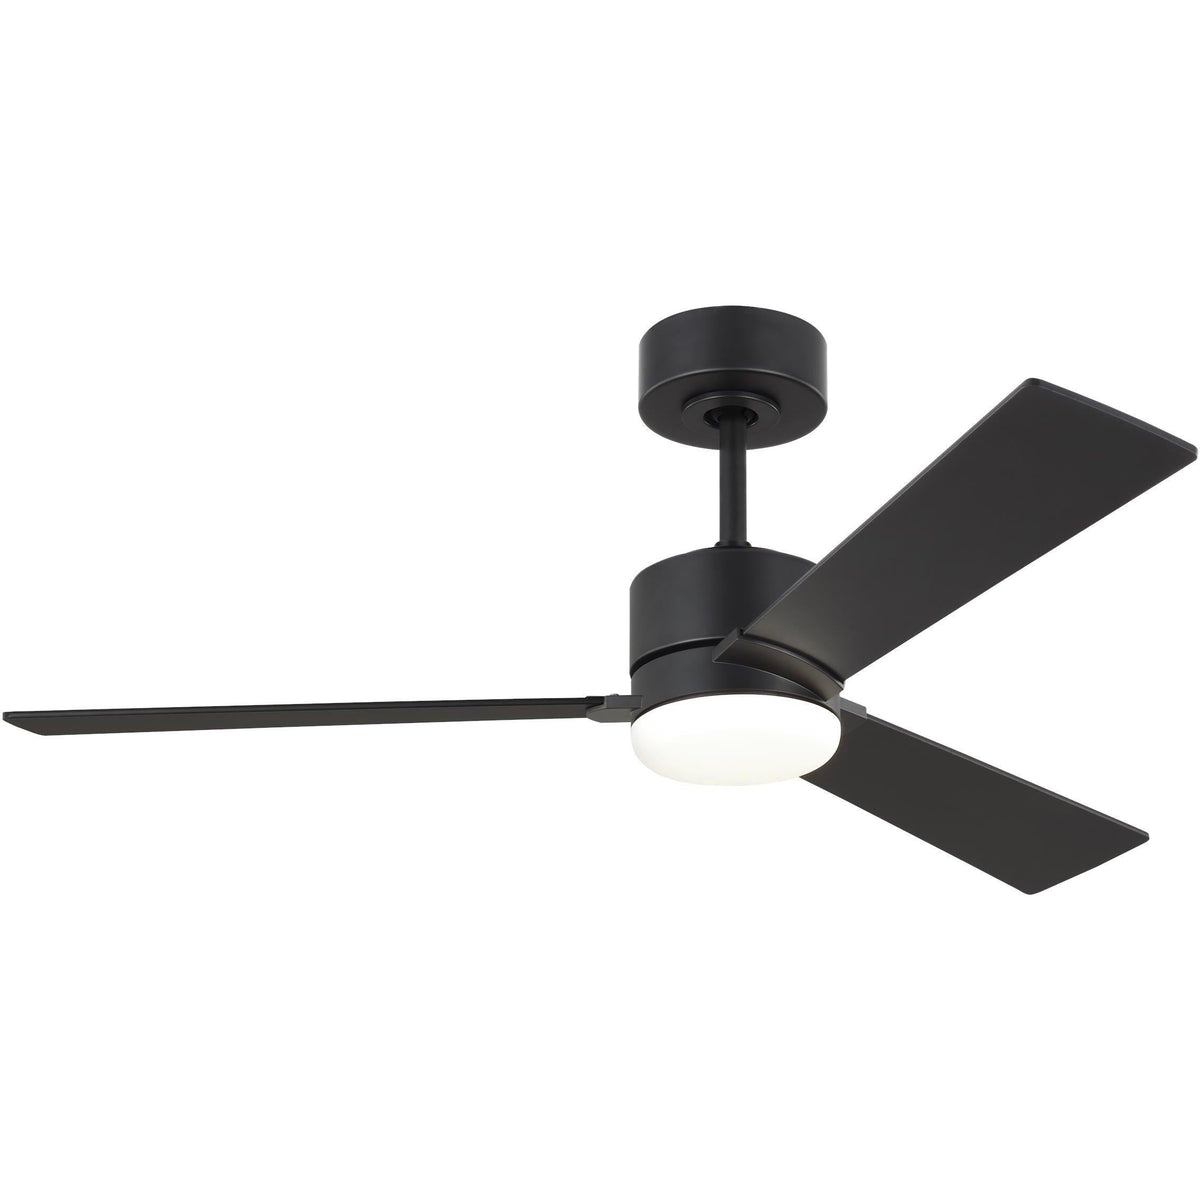 Visual Comfort Fan Collection - Rozzen Ceiling Fan - 3RZR44MBK | Montreal Lighting & Hardware